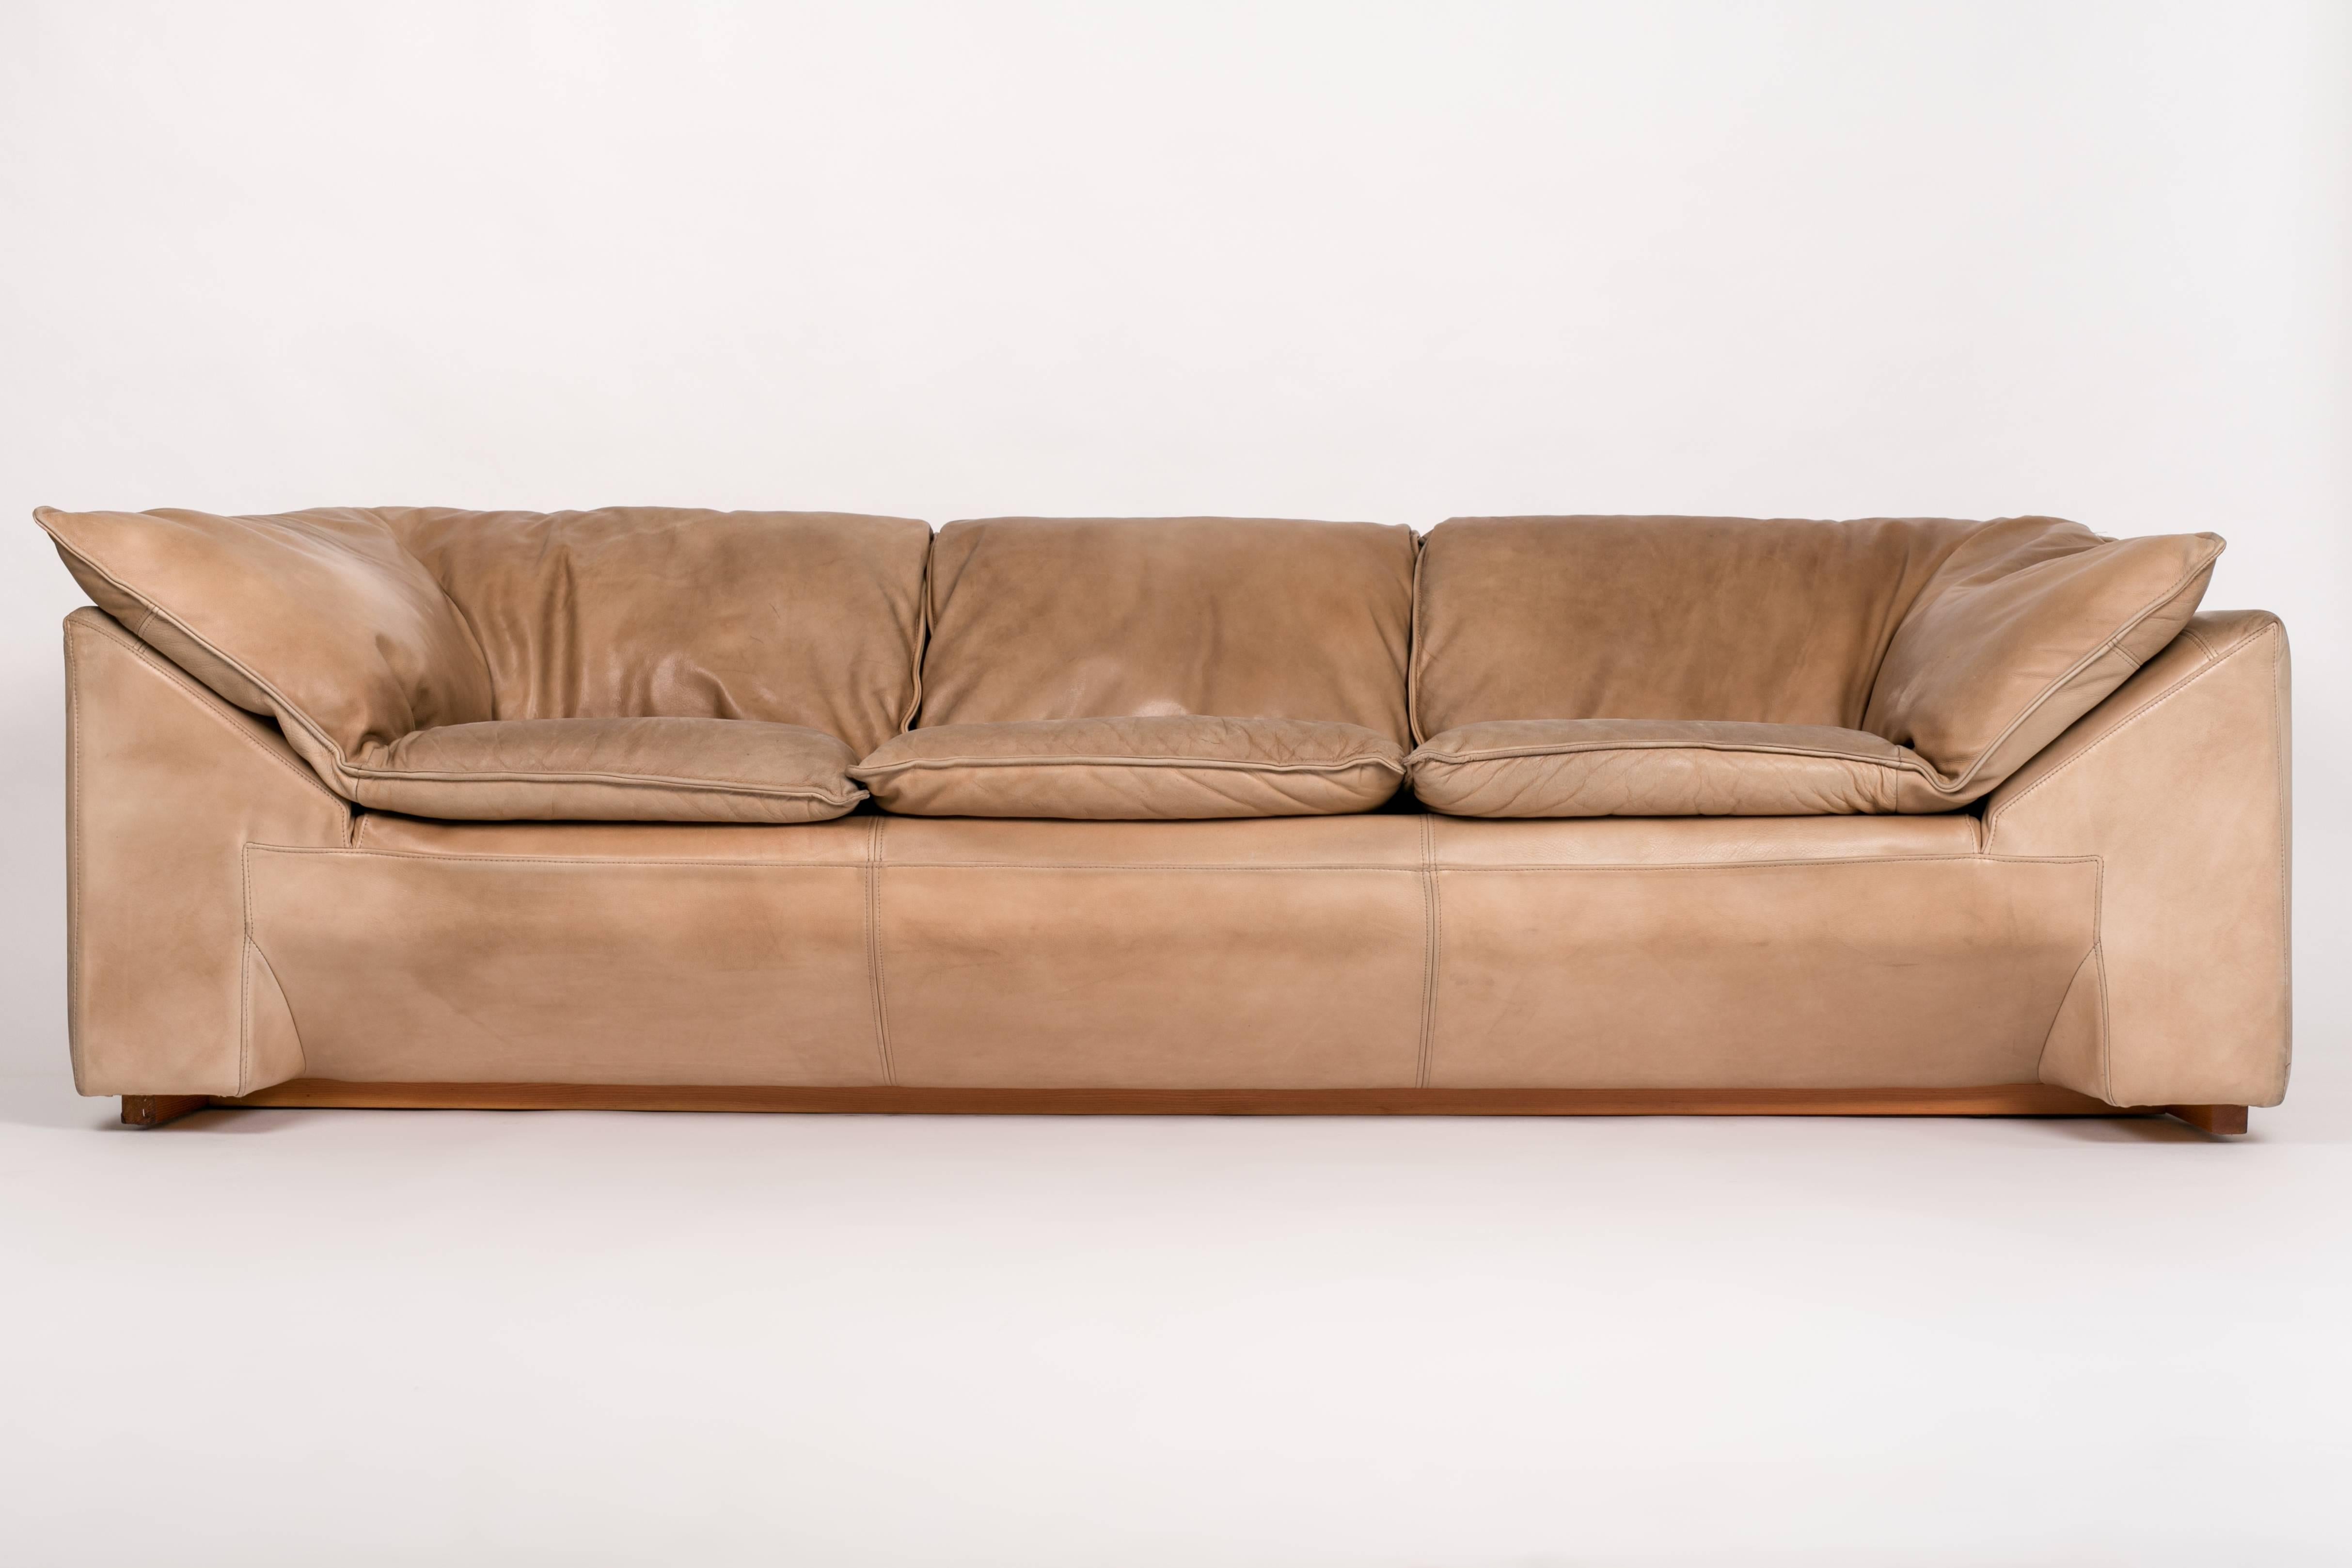 A generous, three-seat sofa designed by Jens Juul Eilersen for his family company, Niels Eilersen in the 1970s. The sofa has an upholstered, solid wood frame on a recessed wooden base. The seat is defined by luxurious down cushions, stylistically